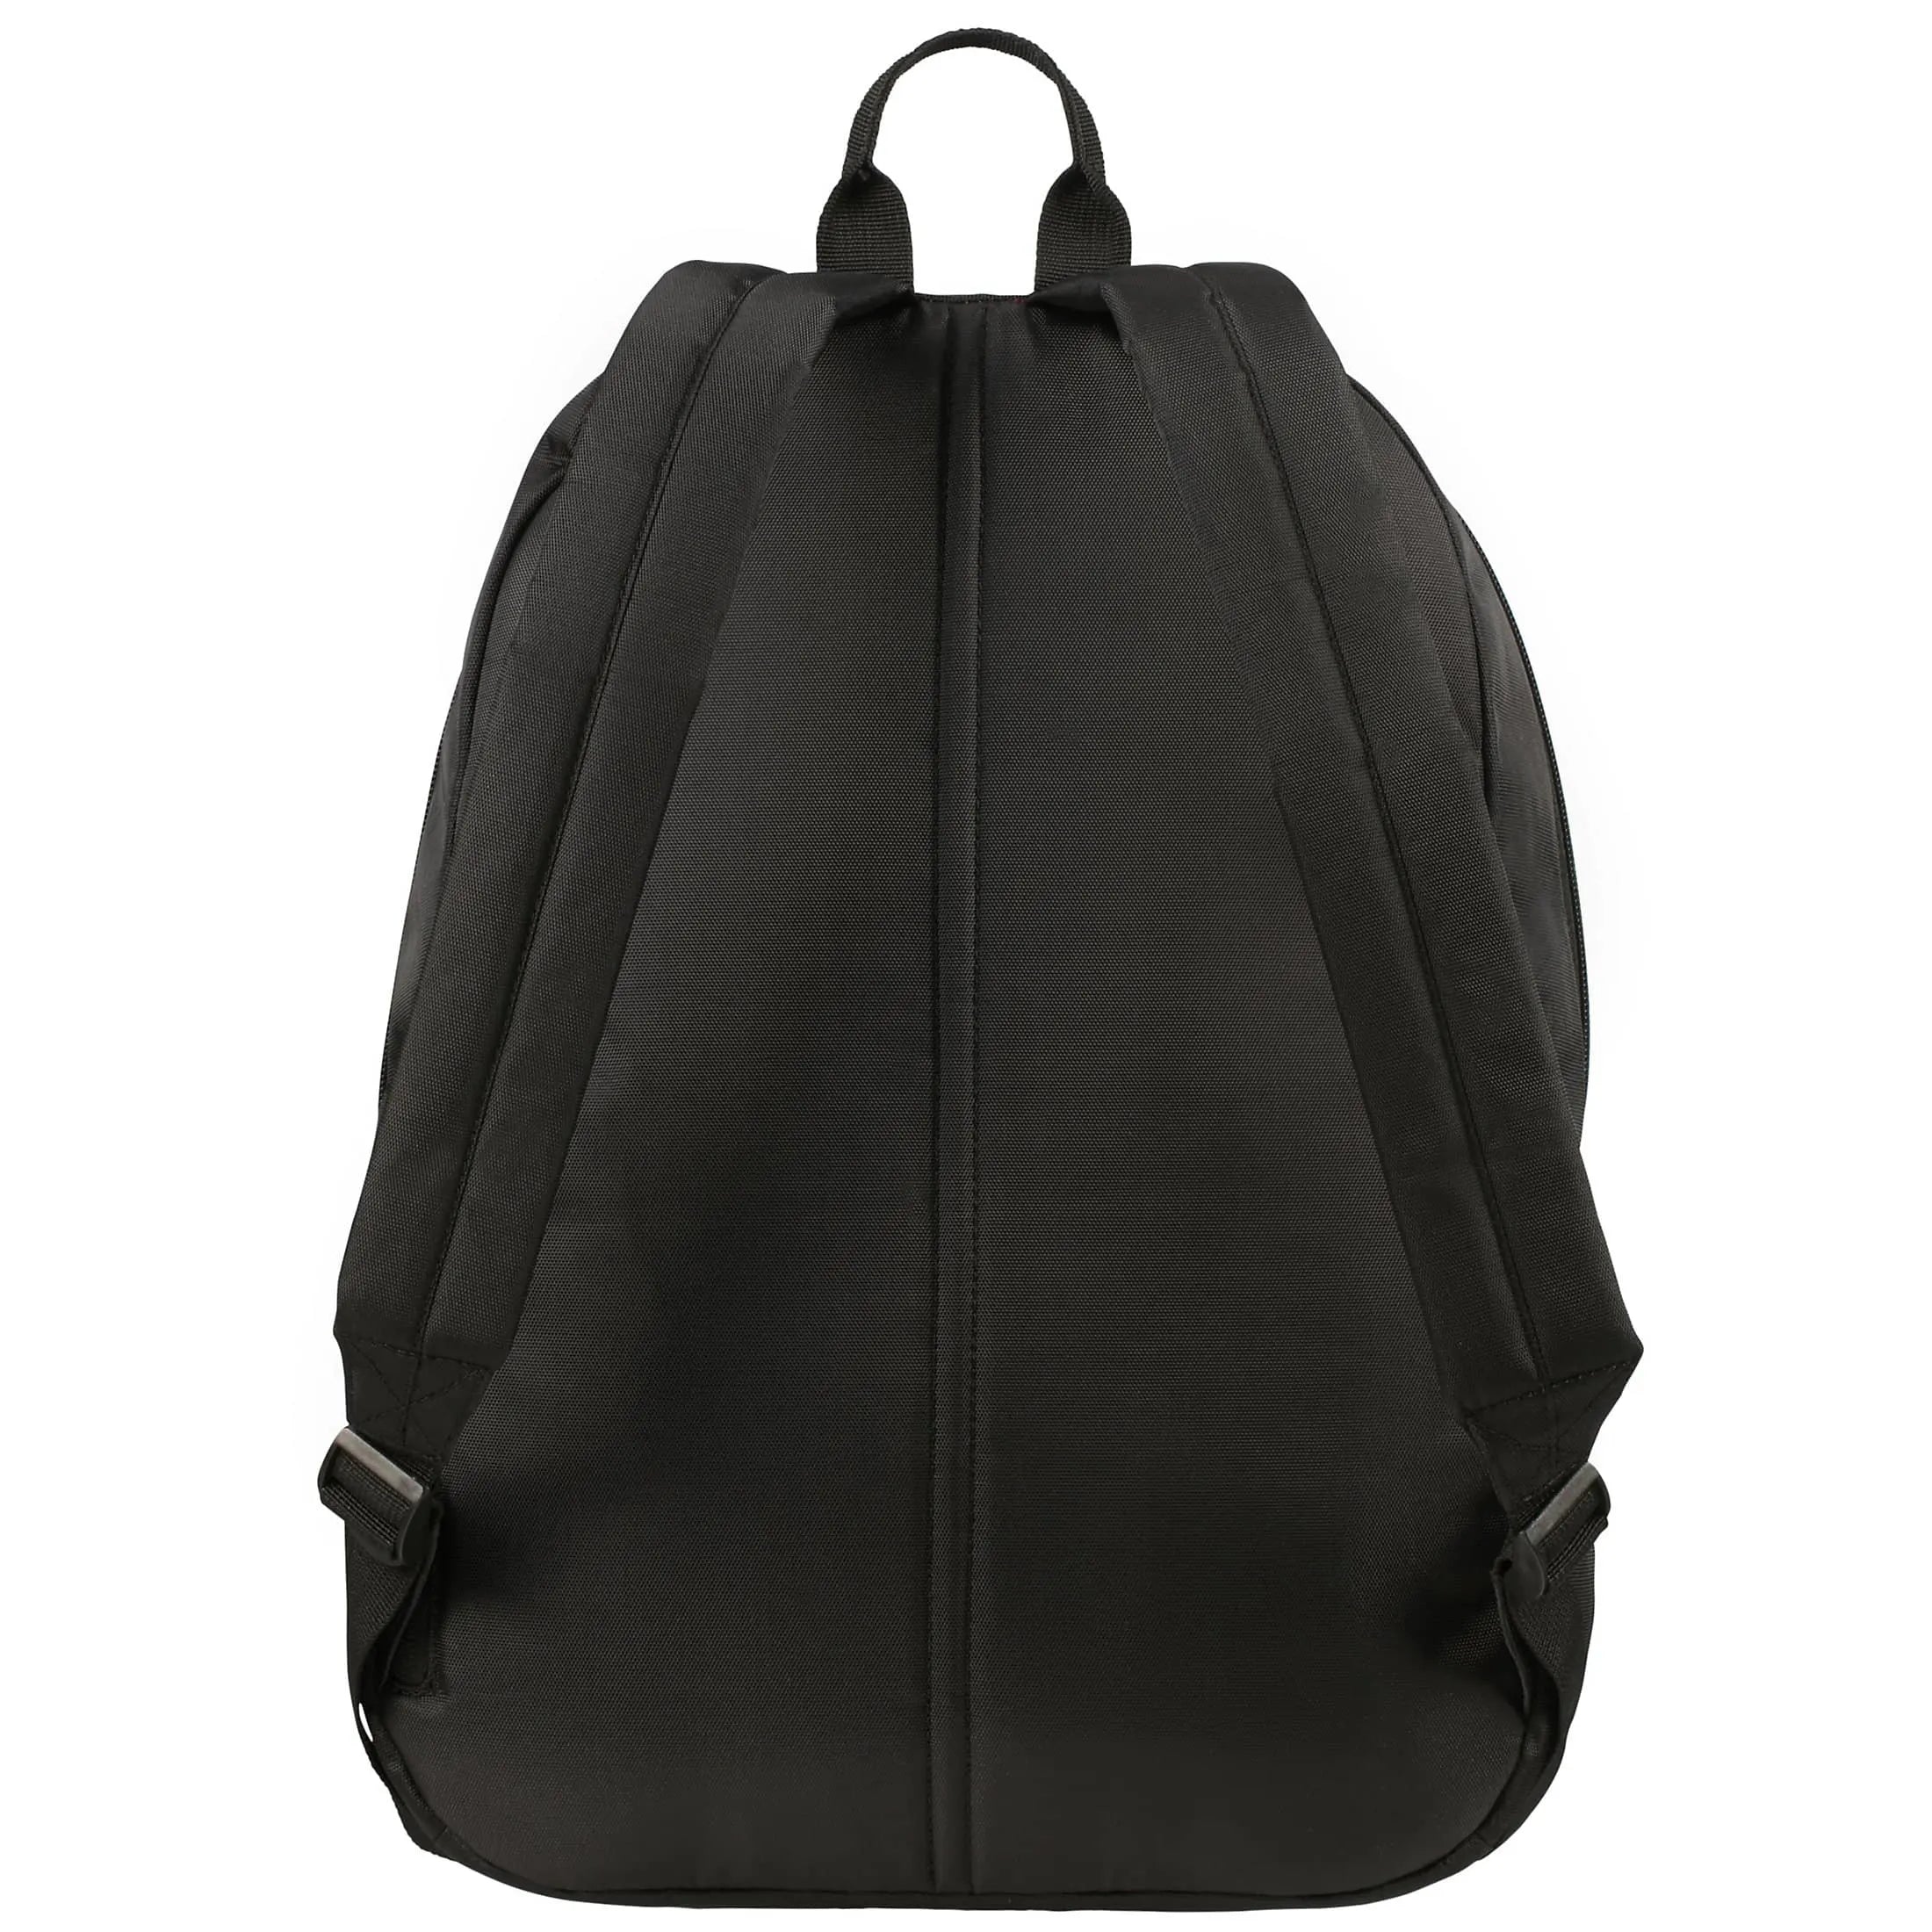 American Tourister Upbeat Backpack 42 cm - black